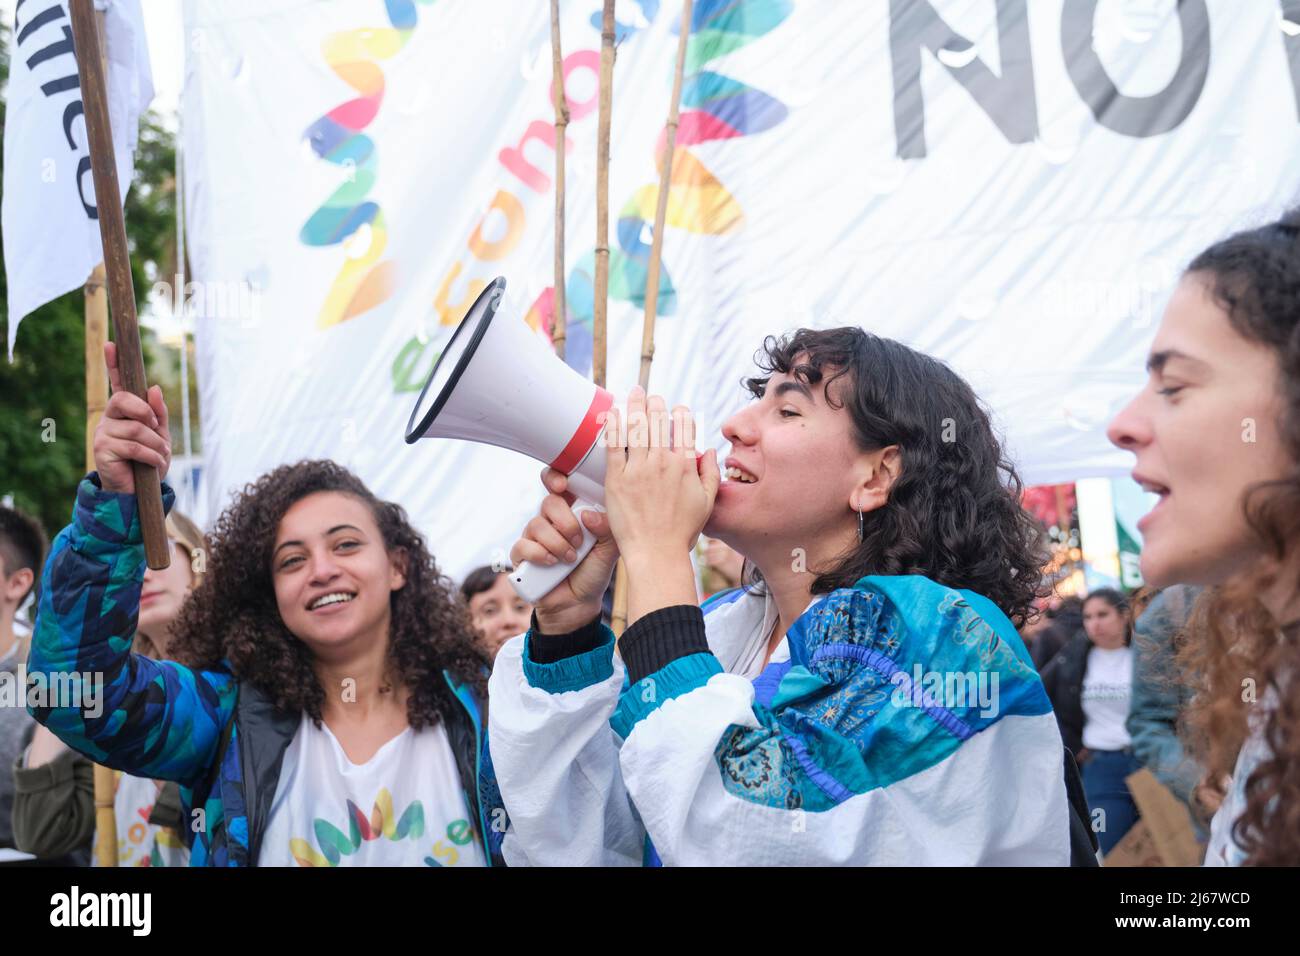 Buenos Aires, Argentina; April 22, 2022: Young activists, leader with a megaphone shouting, cheering on an environmental collective during the Earth D Stock Photo